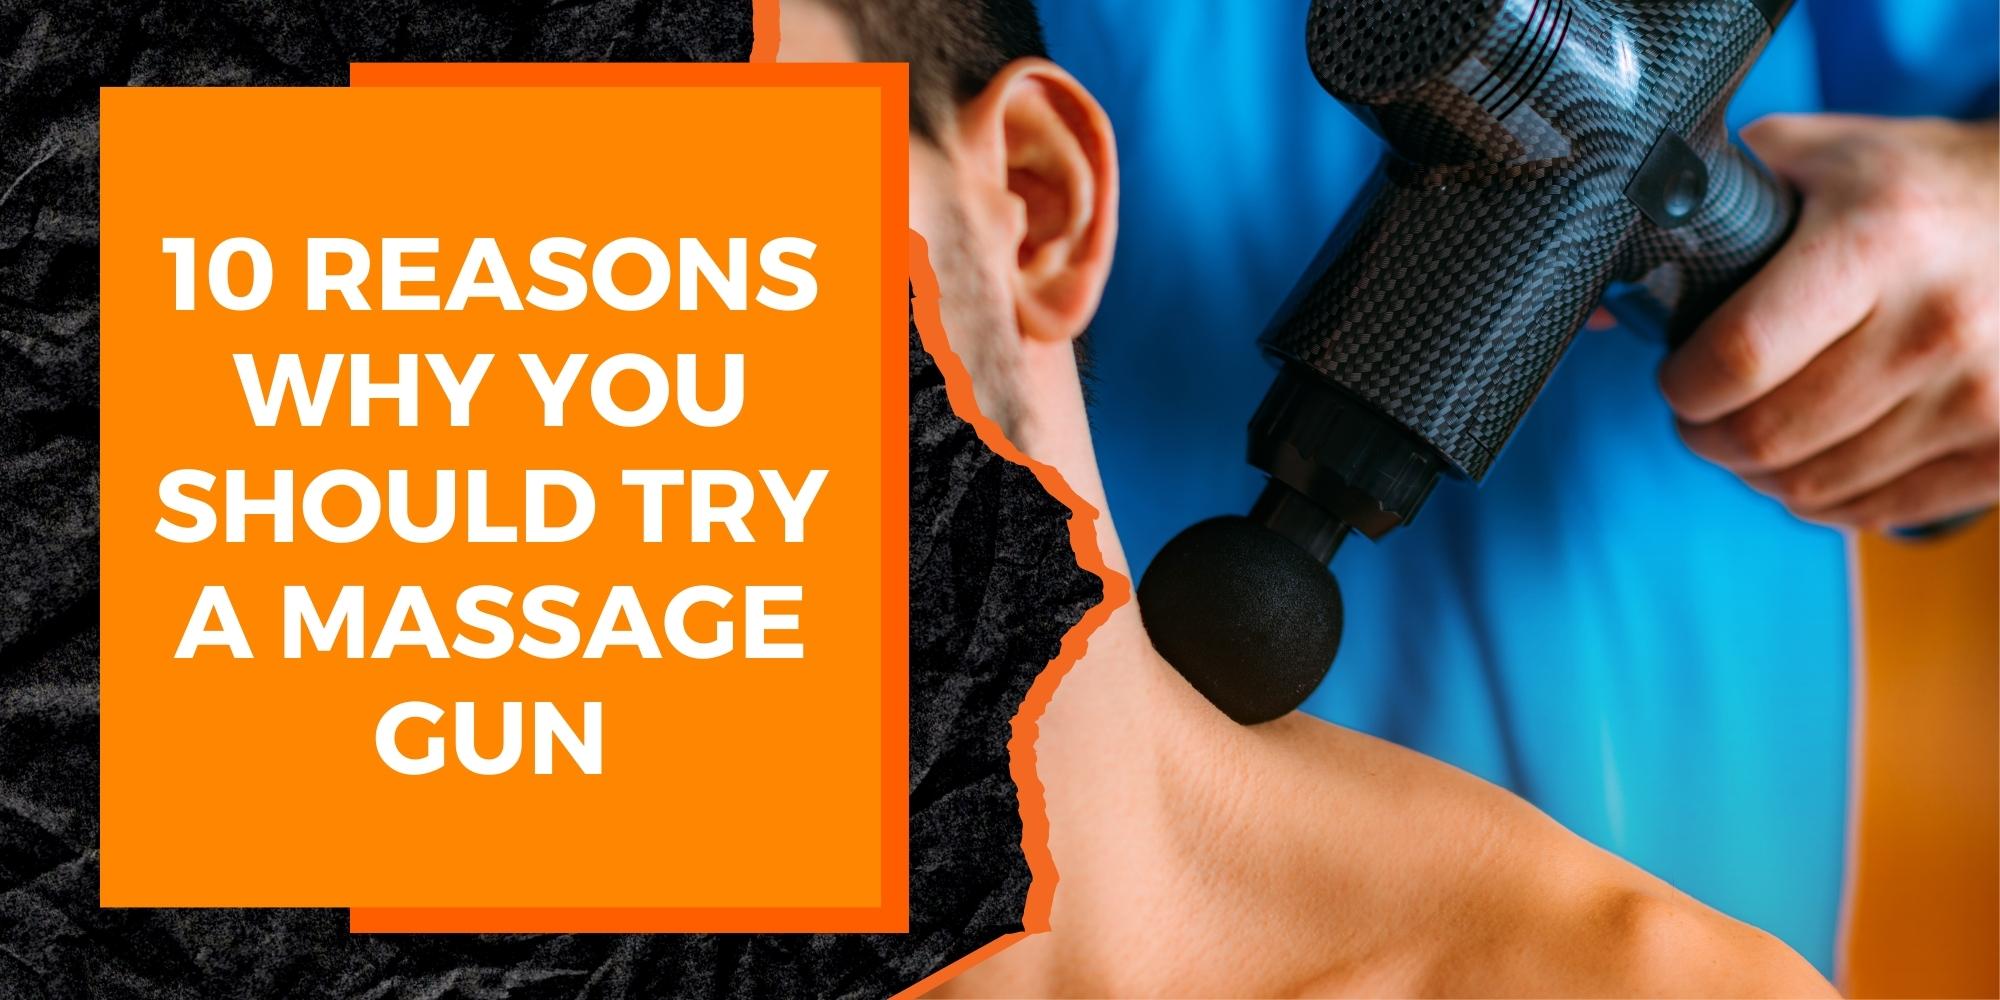 10 Reasons Why You Should Try a Massage Gun